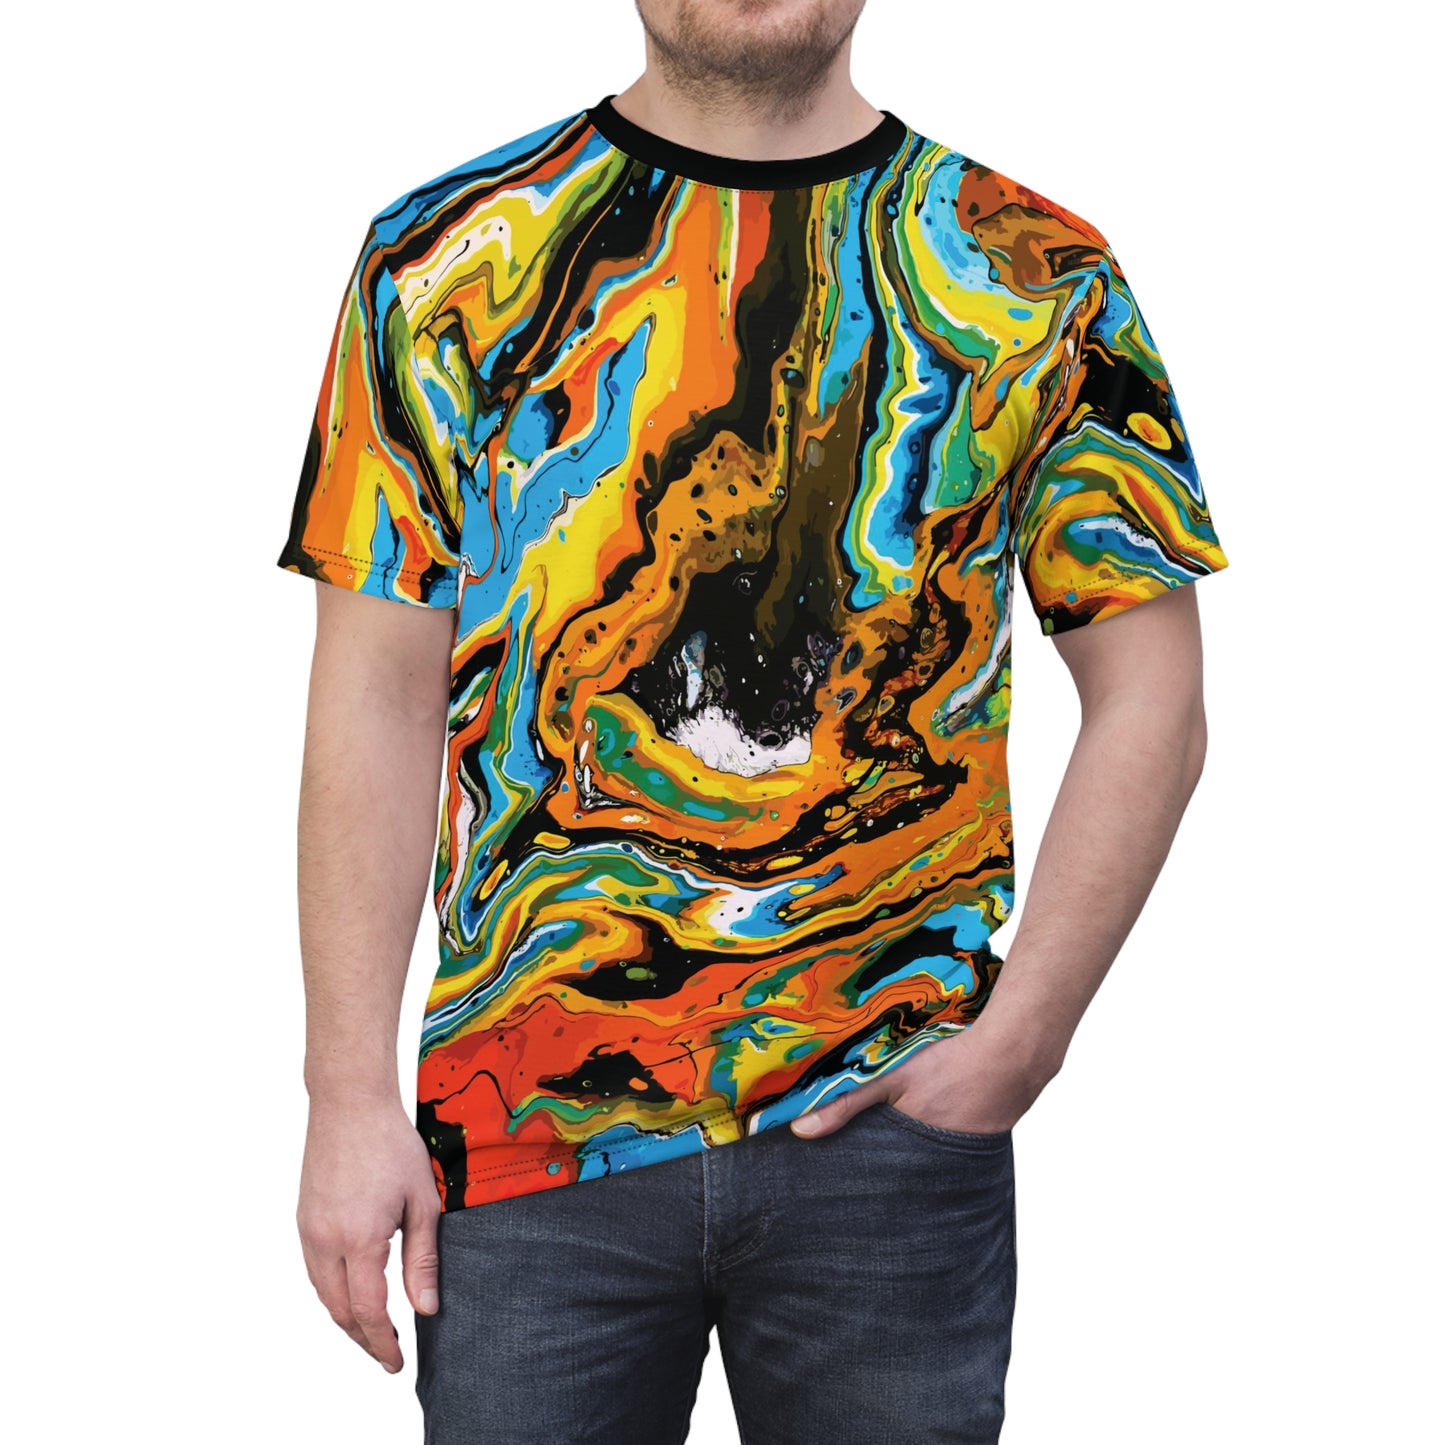 Sunset in Troubled Waters: All-Over Print Unisex Tee